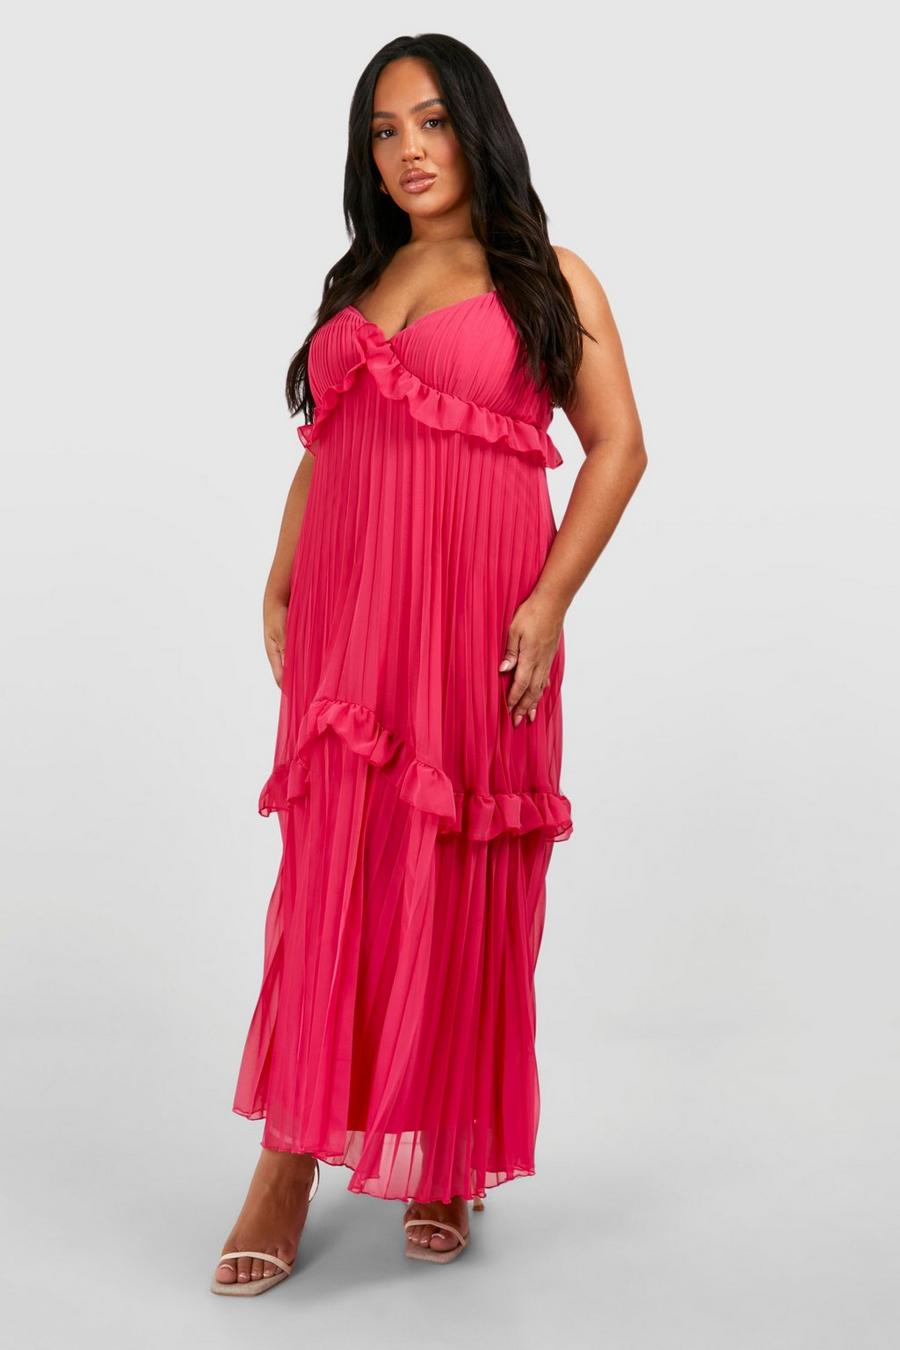 Find Latest Maxi Dresses for Women Online at Best Prices